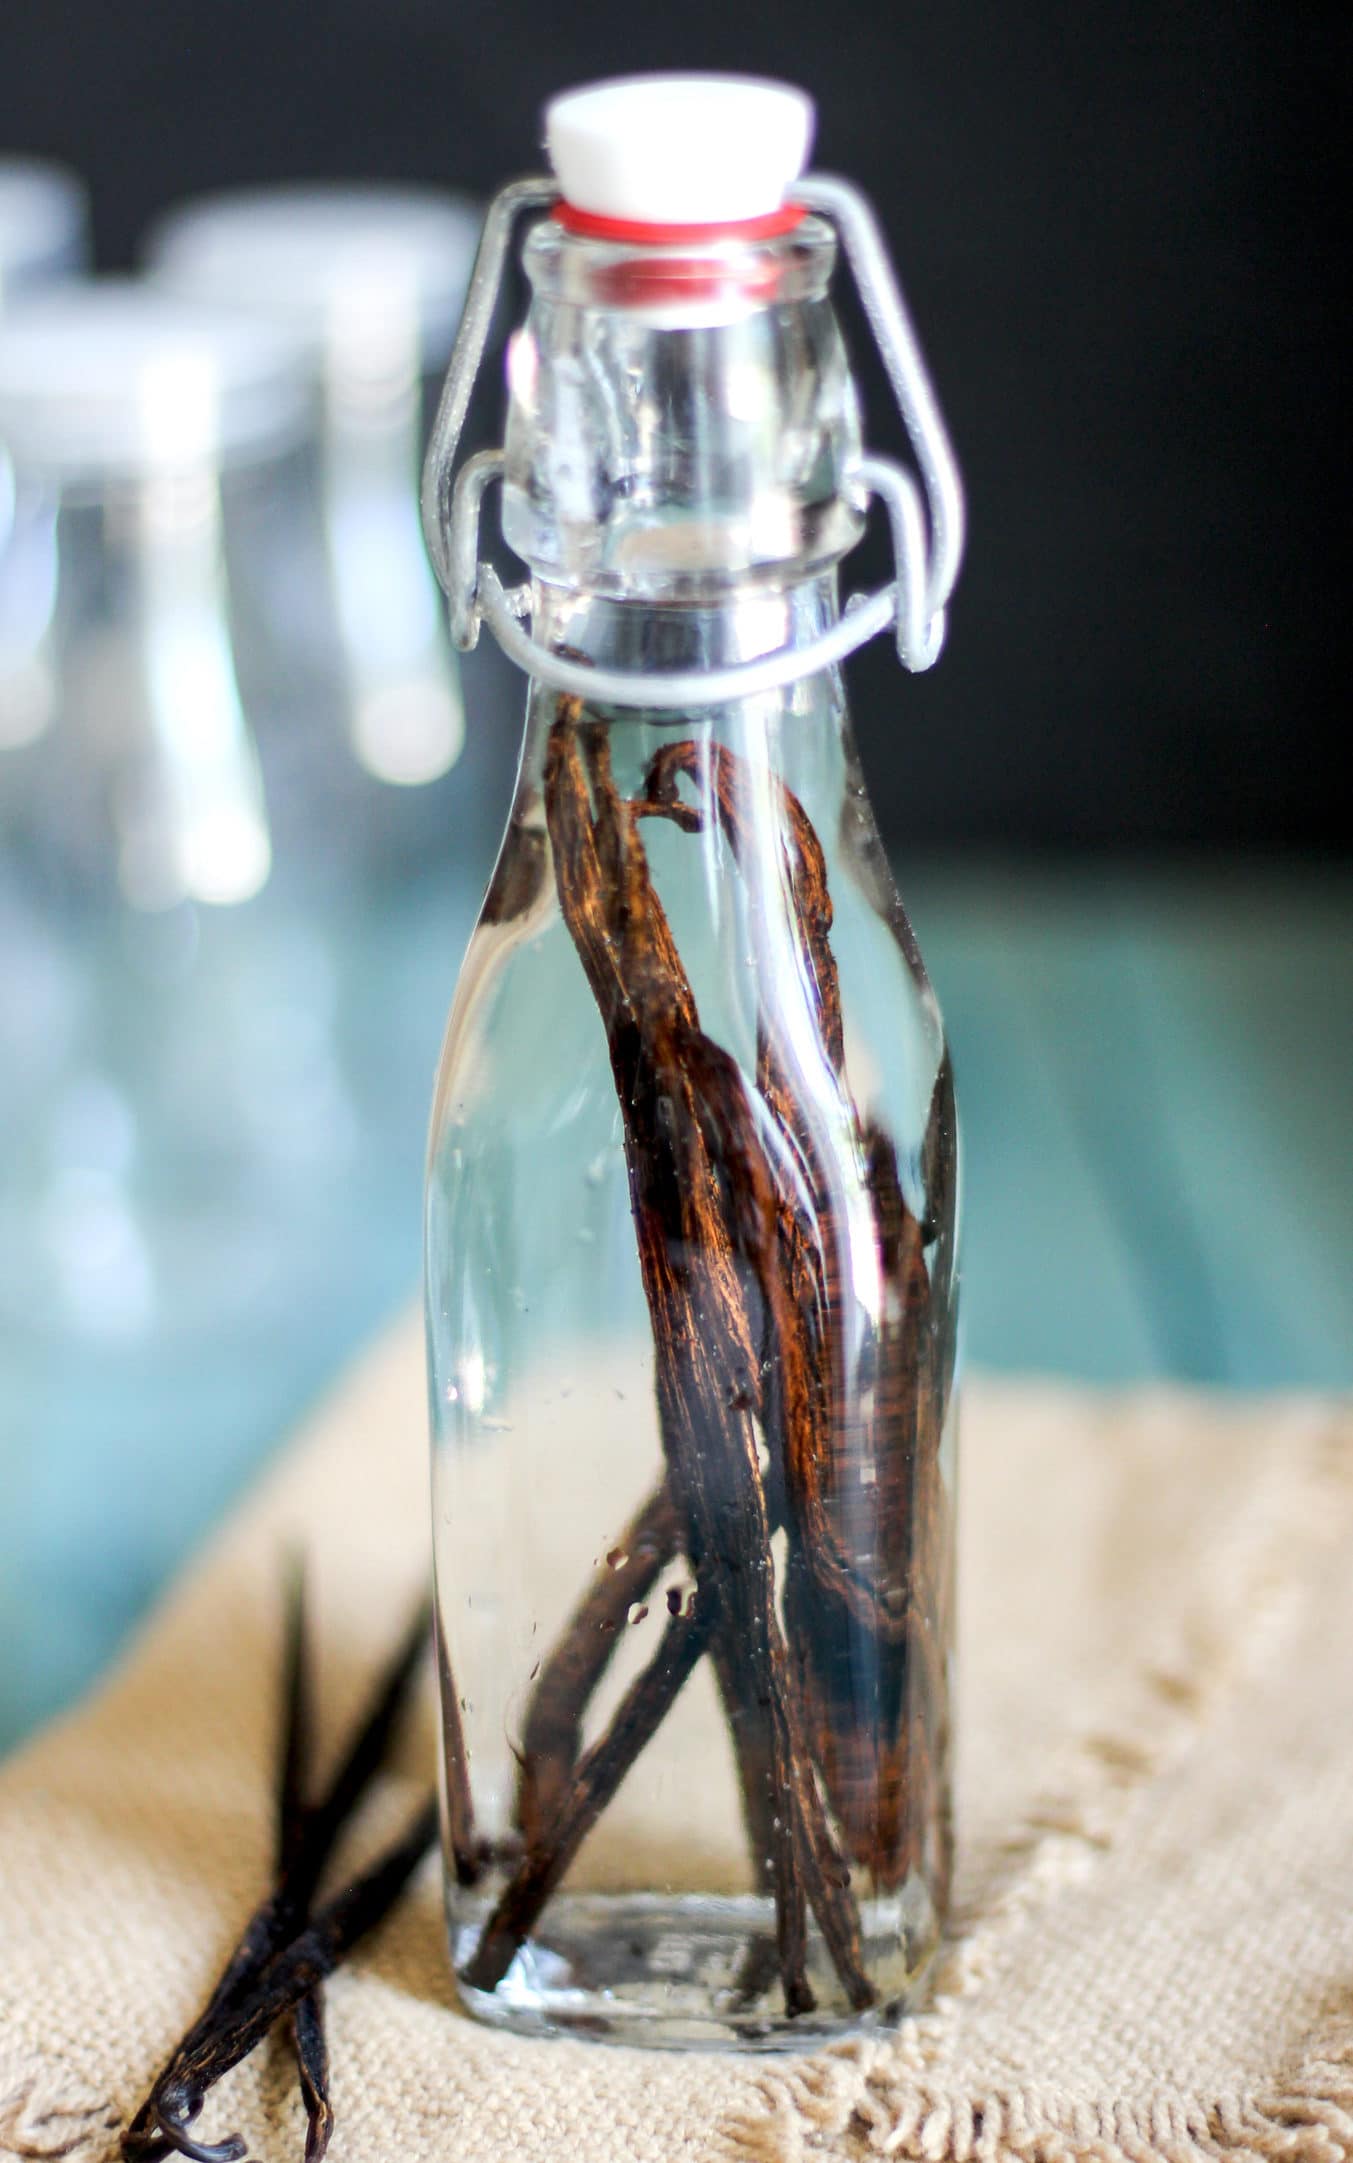 Homemade Vanilla Extract recipe -- How to Make Vanilla Extract at Home! DIY Vanilla Extract is the perfect project and gift for the baker in your life (all natural, sugar free, fat free, gluten free, vegan) - Healthy Dessert Recipes at Desserts with Benefits